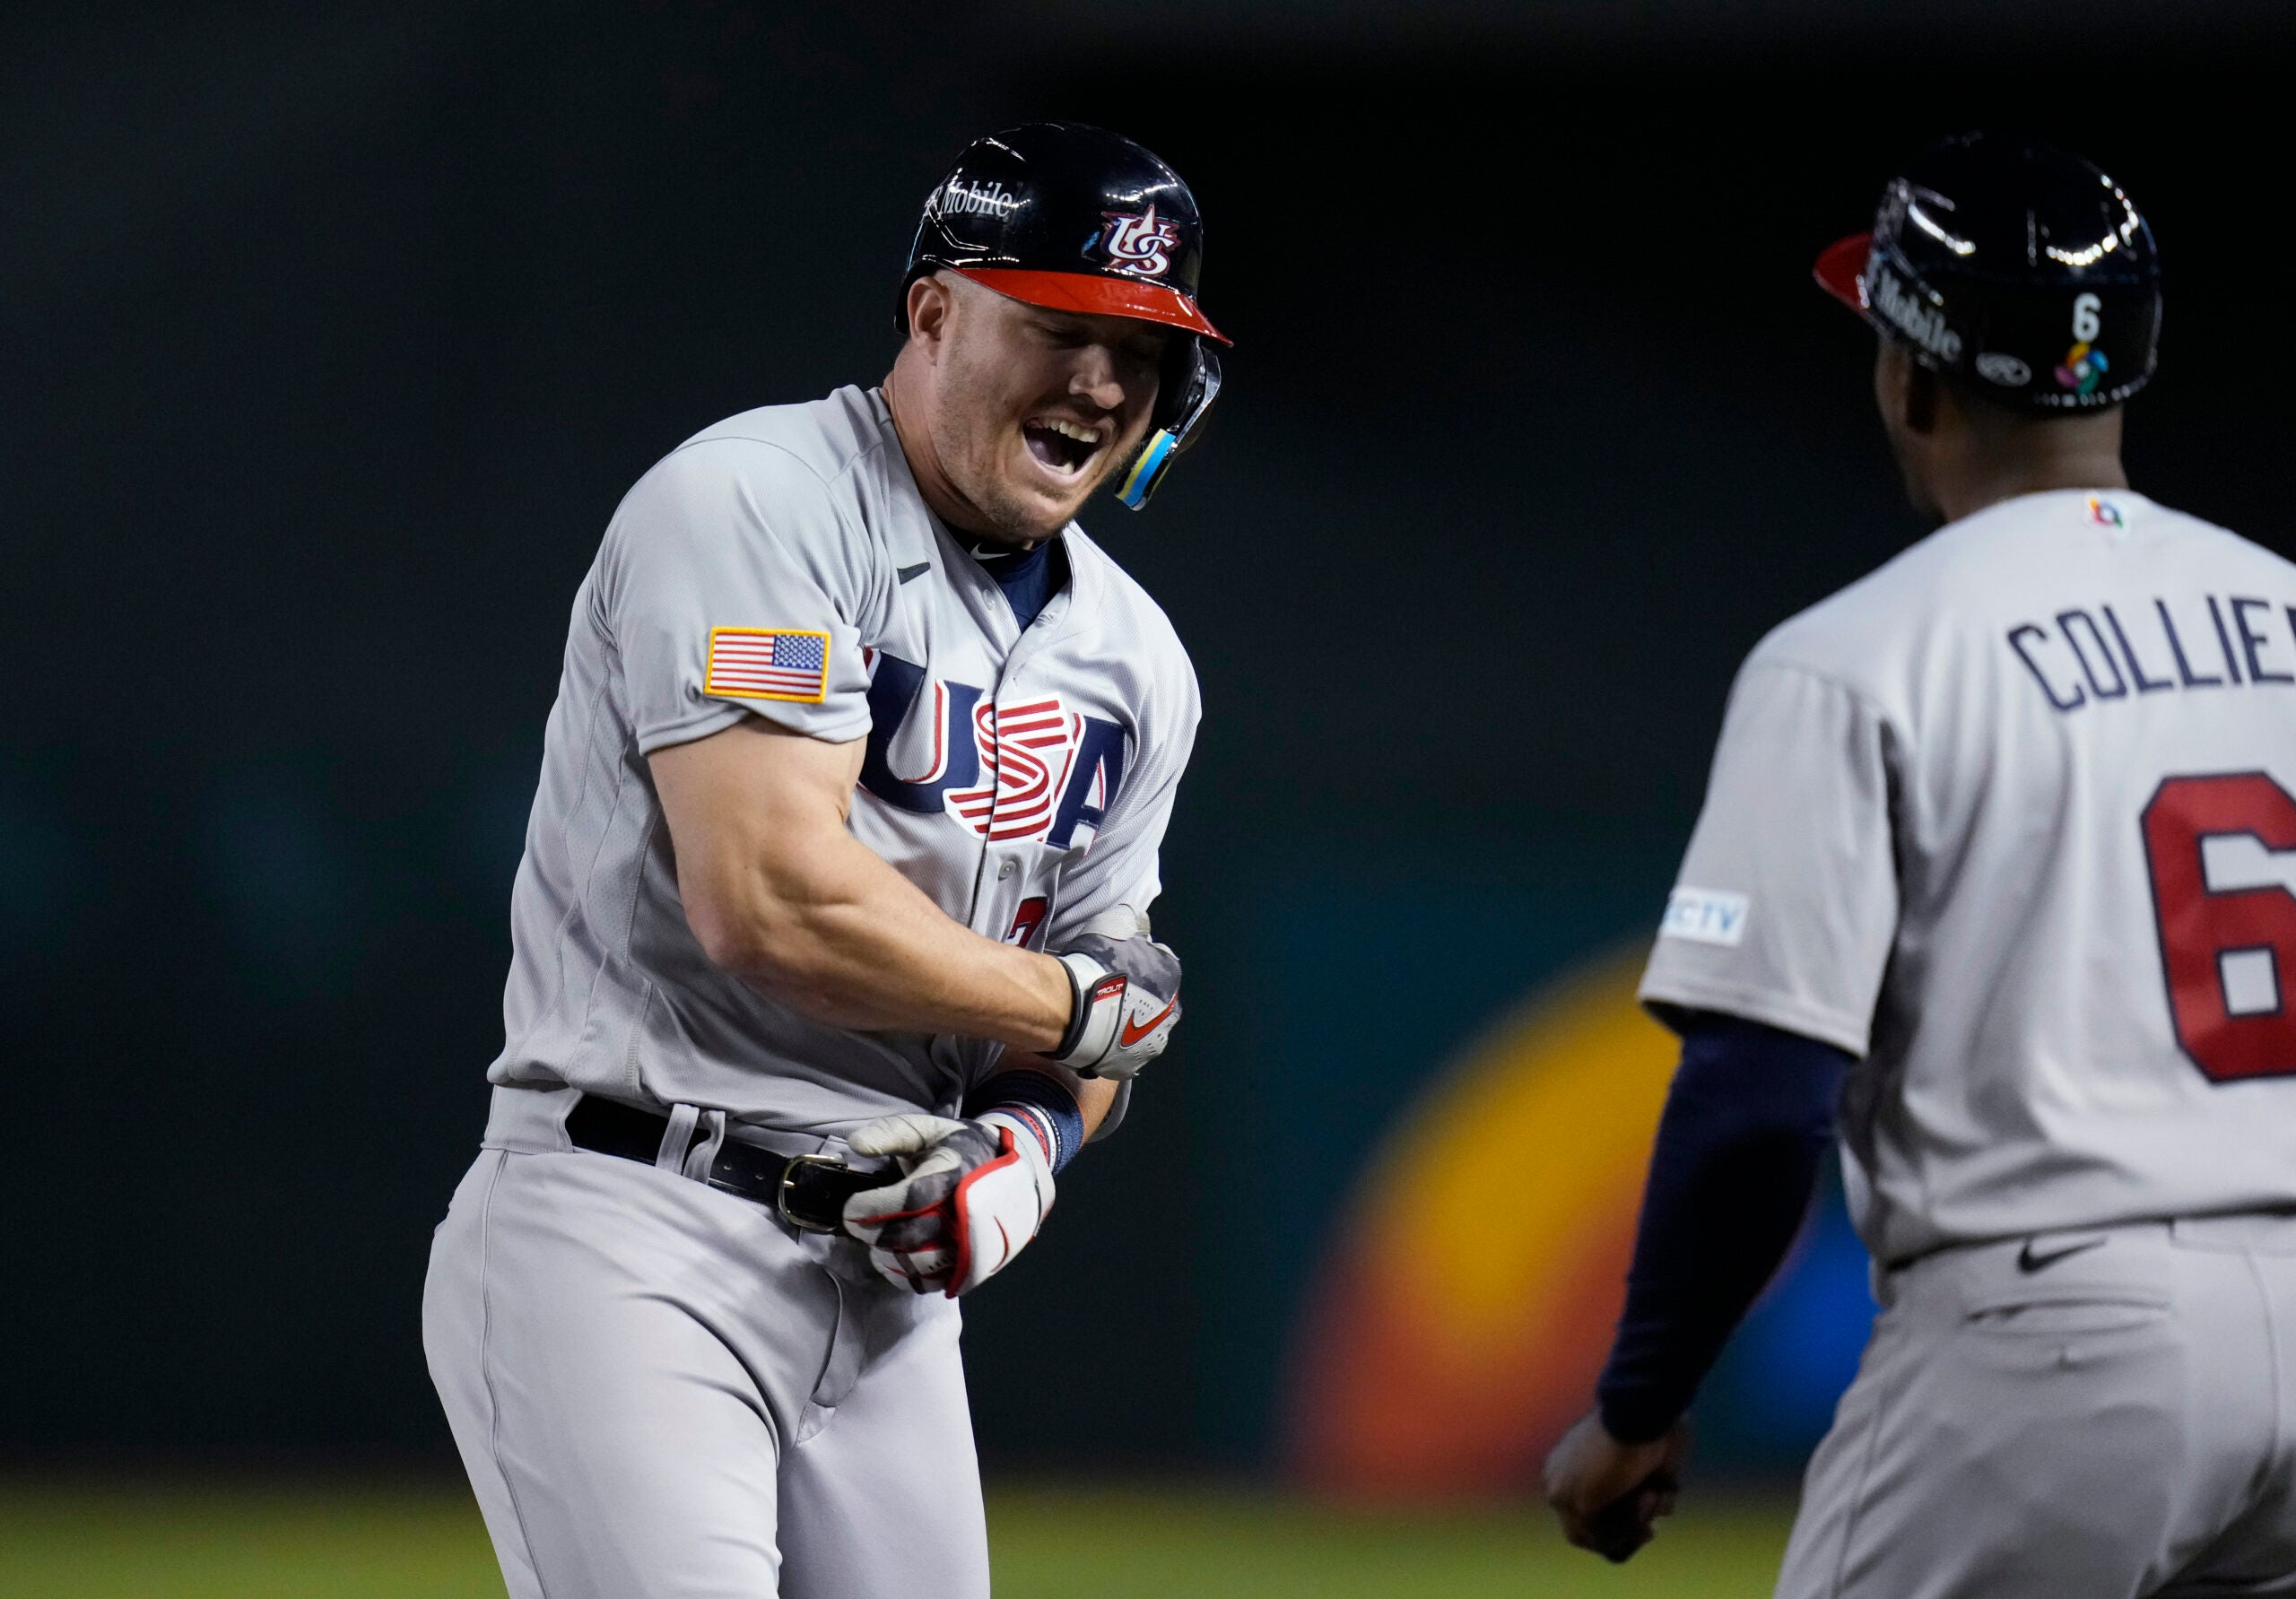 Mike Trout celebrates for team USA in the World Baseball Classic